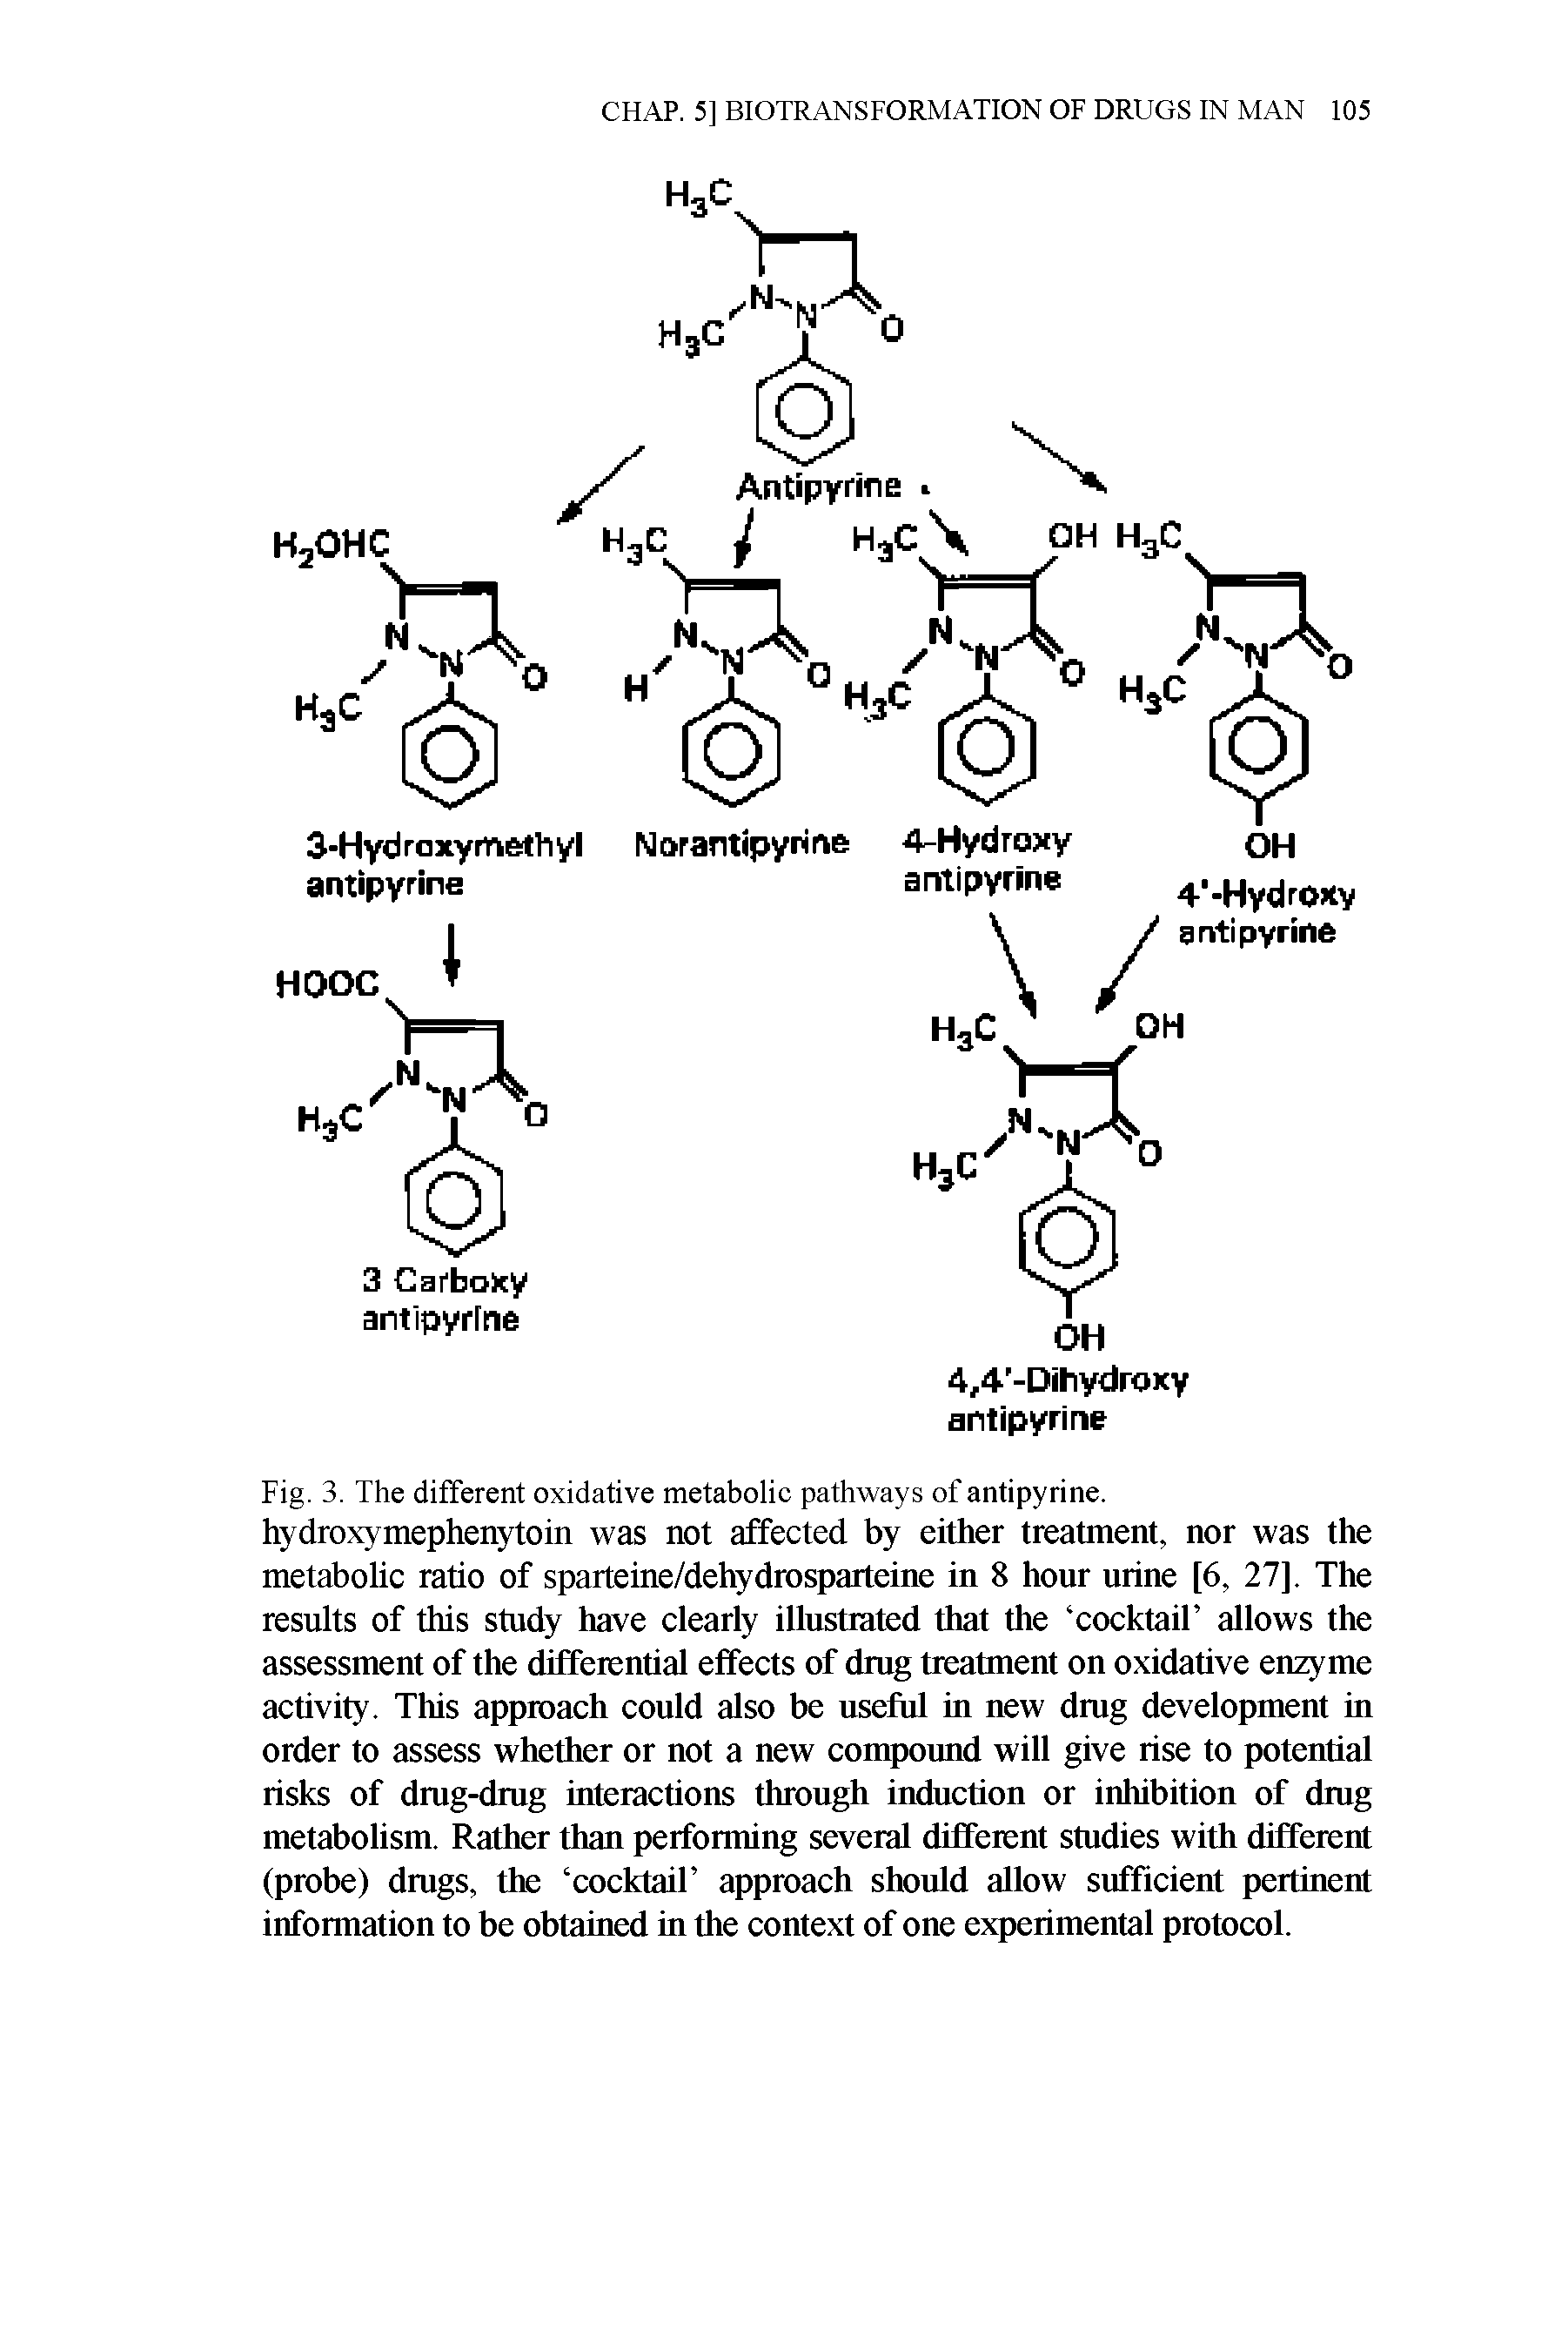 Fig. 3. The difTerent oxidative metabolic pathways of antipyrine. hydroxymephenytoin was not affected by either treatment, nor was the metabohc ratio of sparteine/dehydrosparteine in 8 hour urine [6, 27], The results of this study have clearly illustrated that the cocktail allows the assessment of the differential effects of dmg treatment on oxidative enzyme activity. This approach could also be usefiil in new dmg development in order to assess whether or not a new compoimd will give rise to potential risks of dmg-drag interactions through induction or inhibition of dmg metabolism. Rather than performing several different studies with different (probe) dmgs, the cocktail approach should allow sufficient pertinent information to be obtained in the context of one experimental protocol.